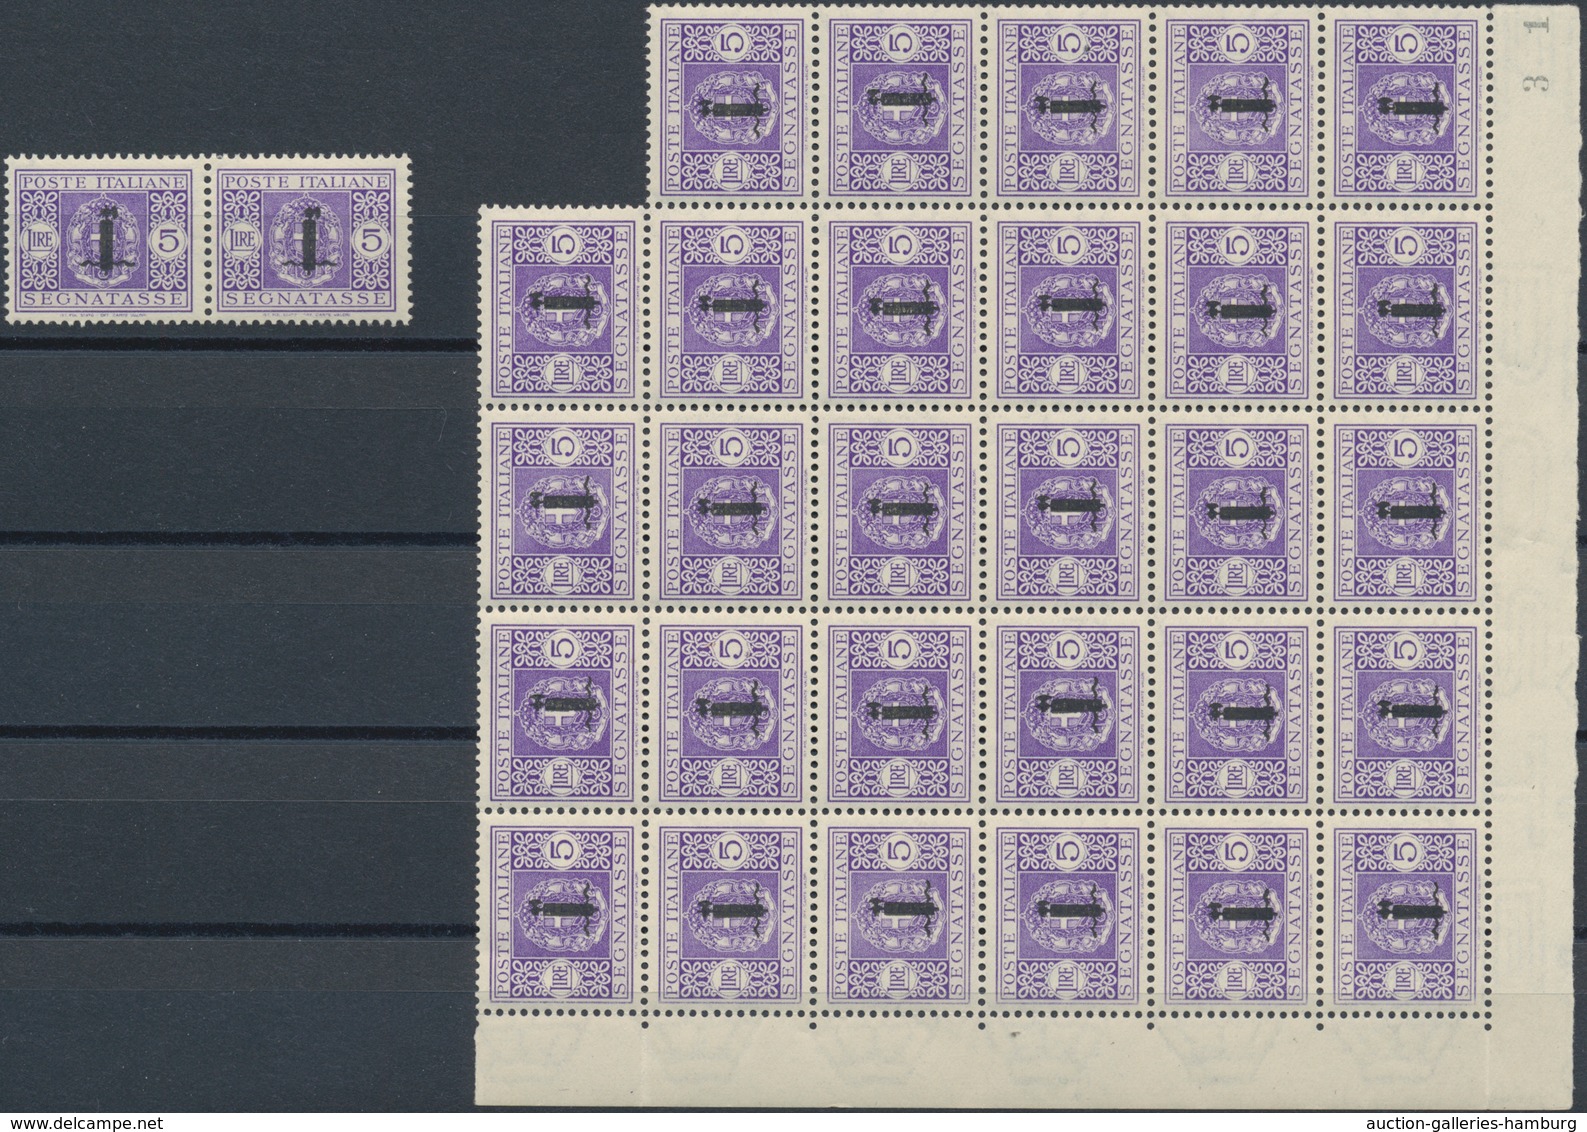 Italien: 1944, Republika Sociale "G.N.R." Issue 5 Lire Violet 31 Stamps Mint Never Hinged Large Bloc - Sin Clasificación